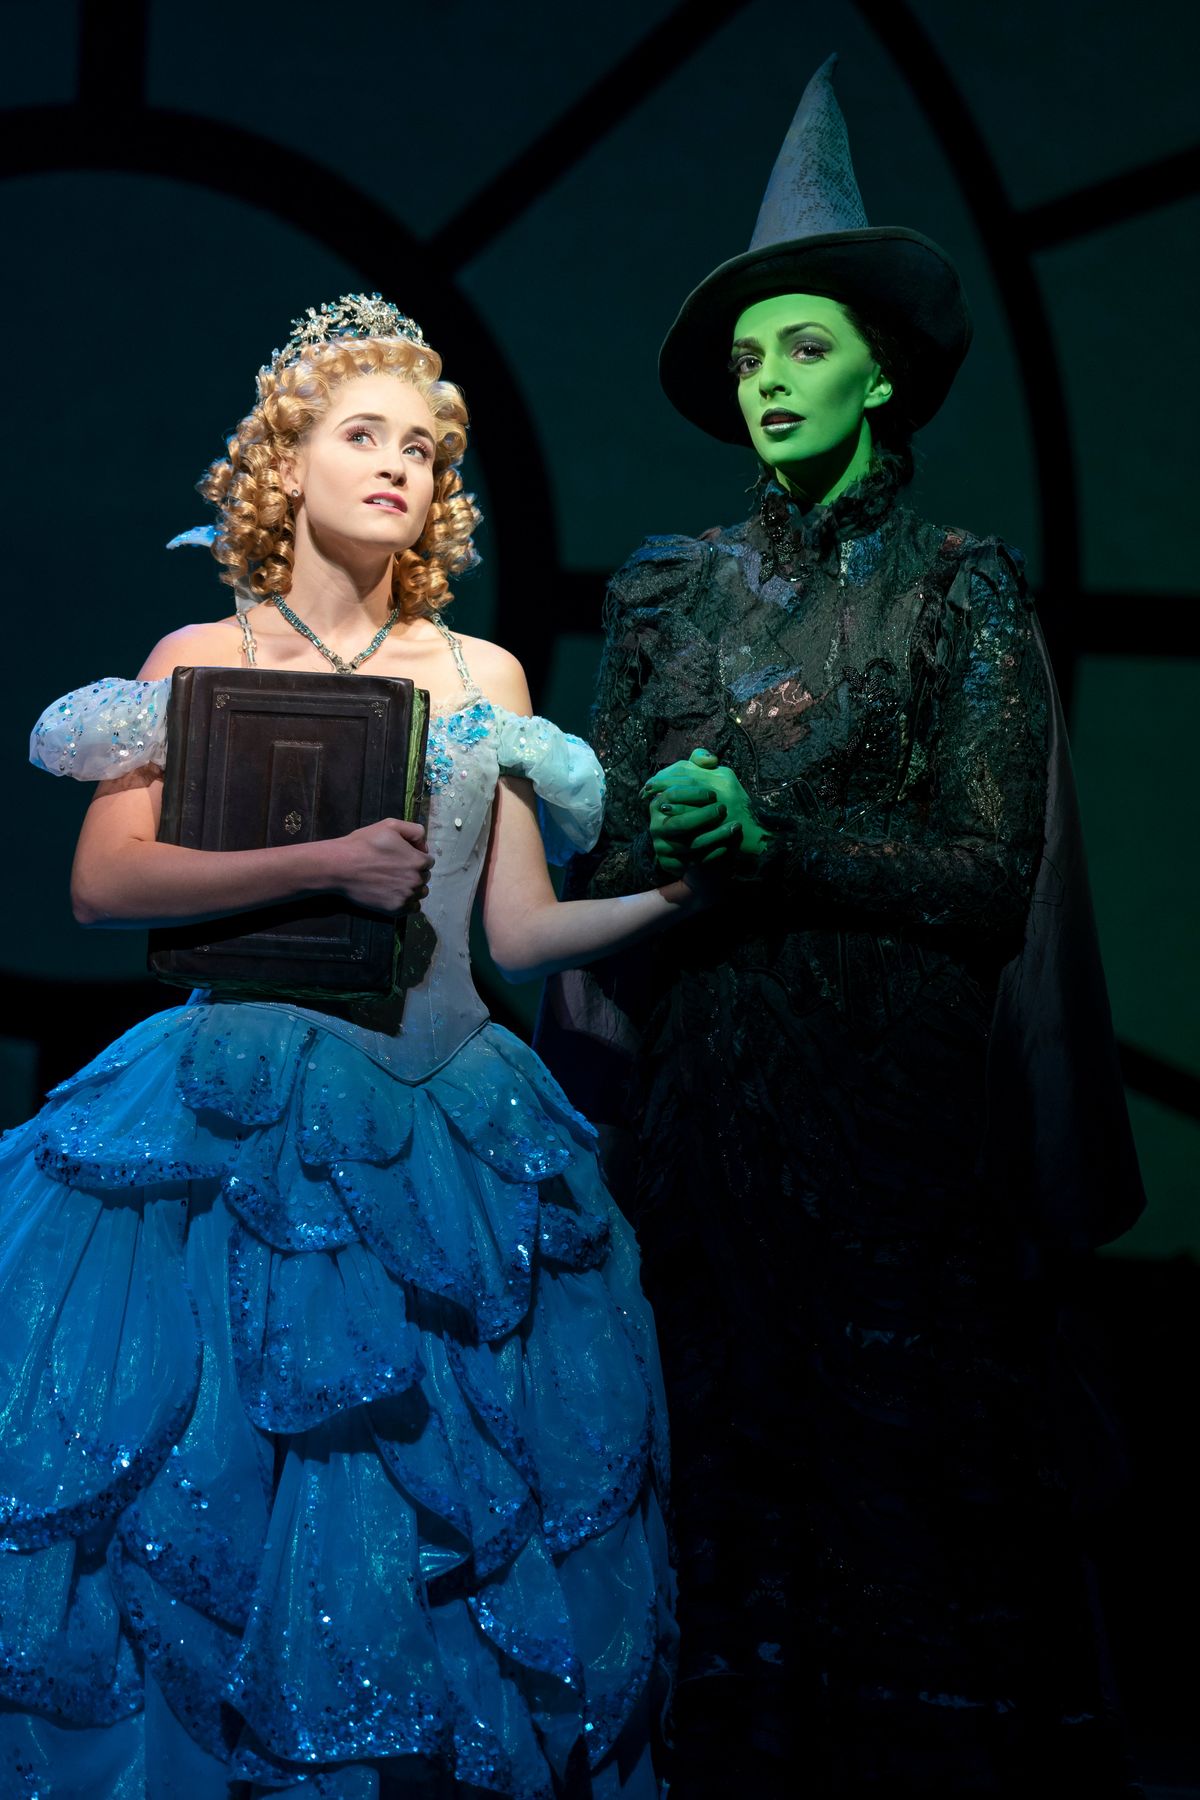 Wicked Friend of Elphaba White Tee – Wicked the Musical Store